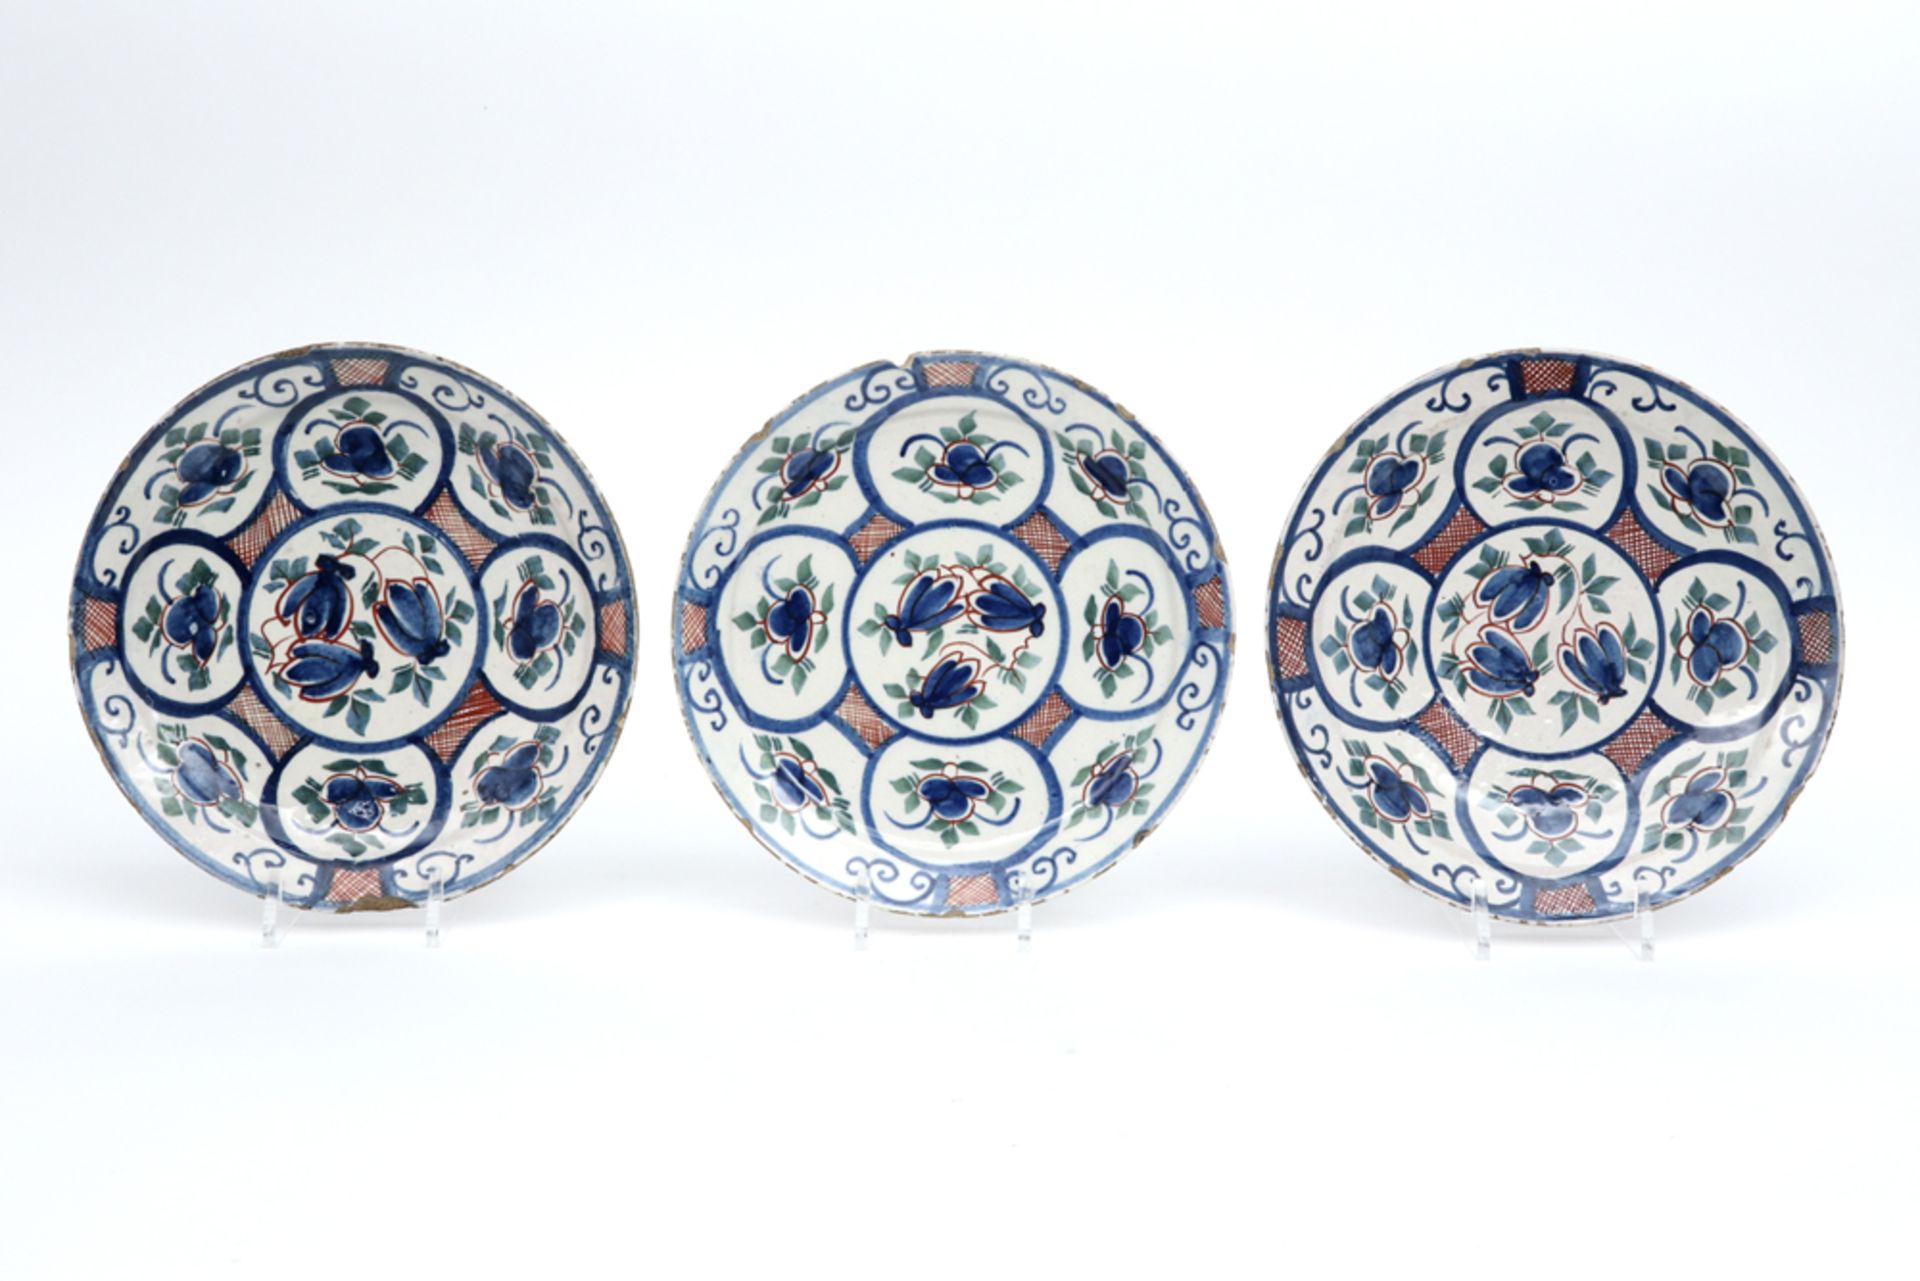 set of three 18th Cent. pancake plates in ceramic from Delft with polychrome decor || Reeks van drie